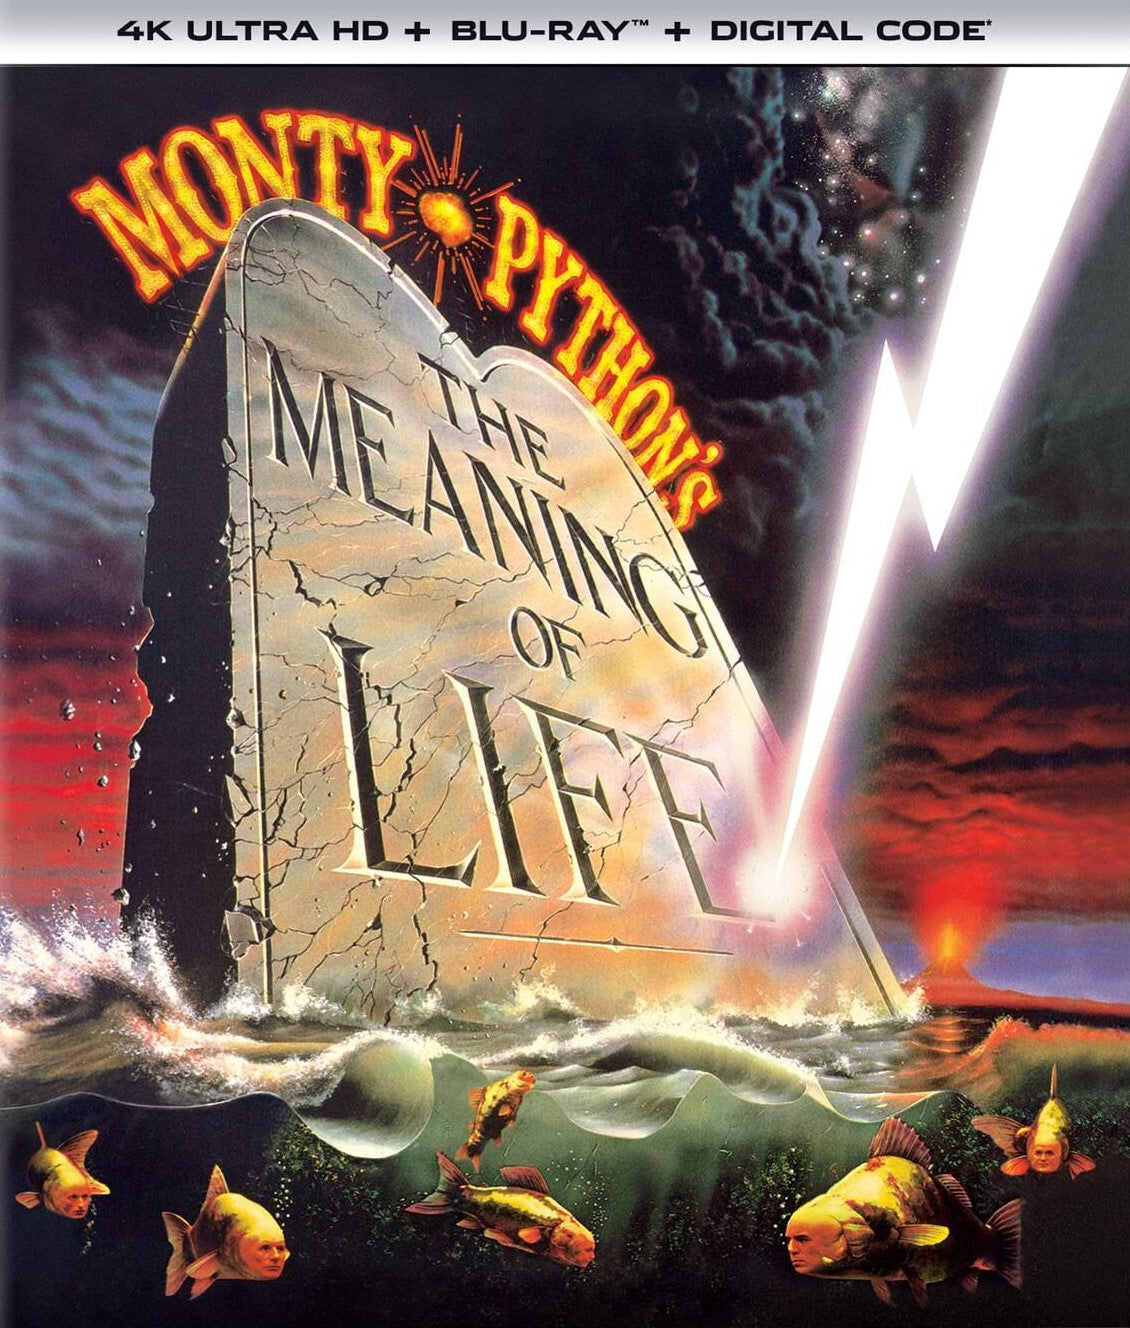 MONTY PYTHON'S THE MEANING OF LIFE 4K UHD/BLU-RAY